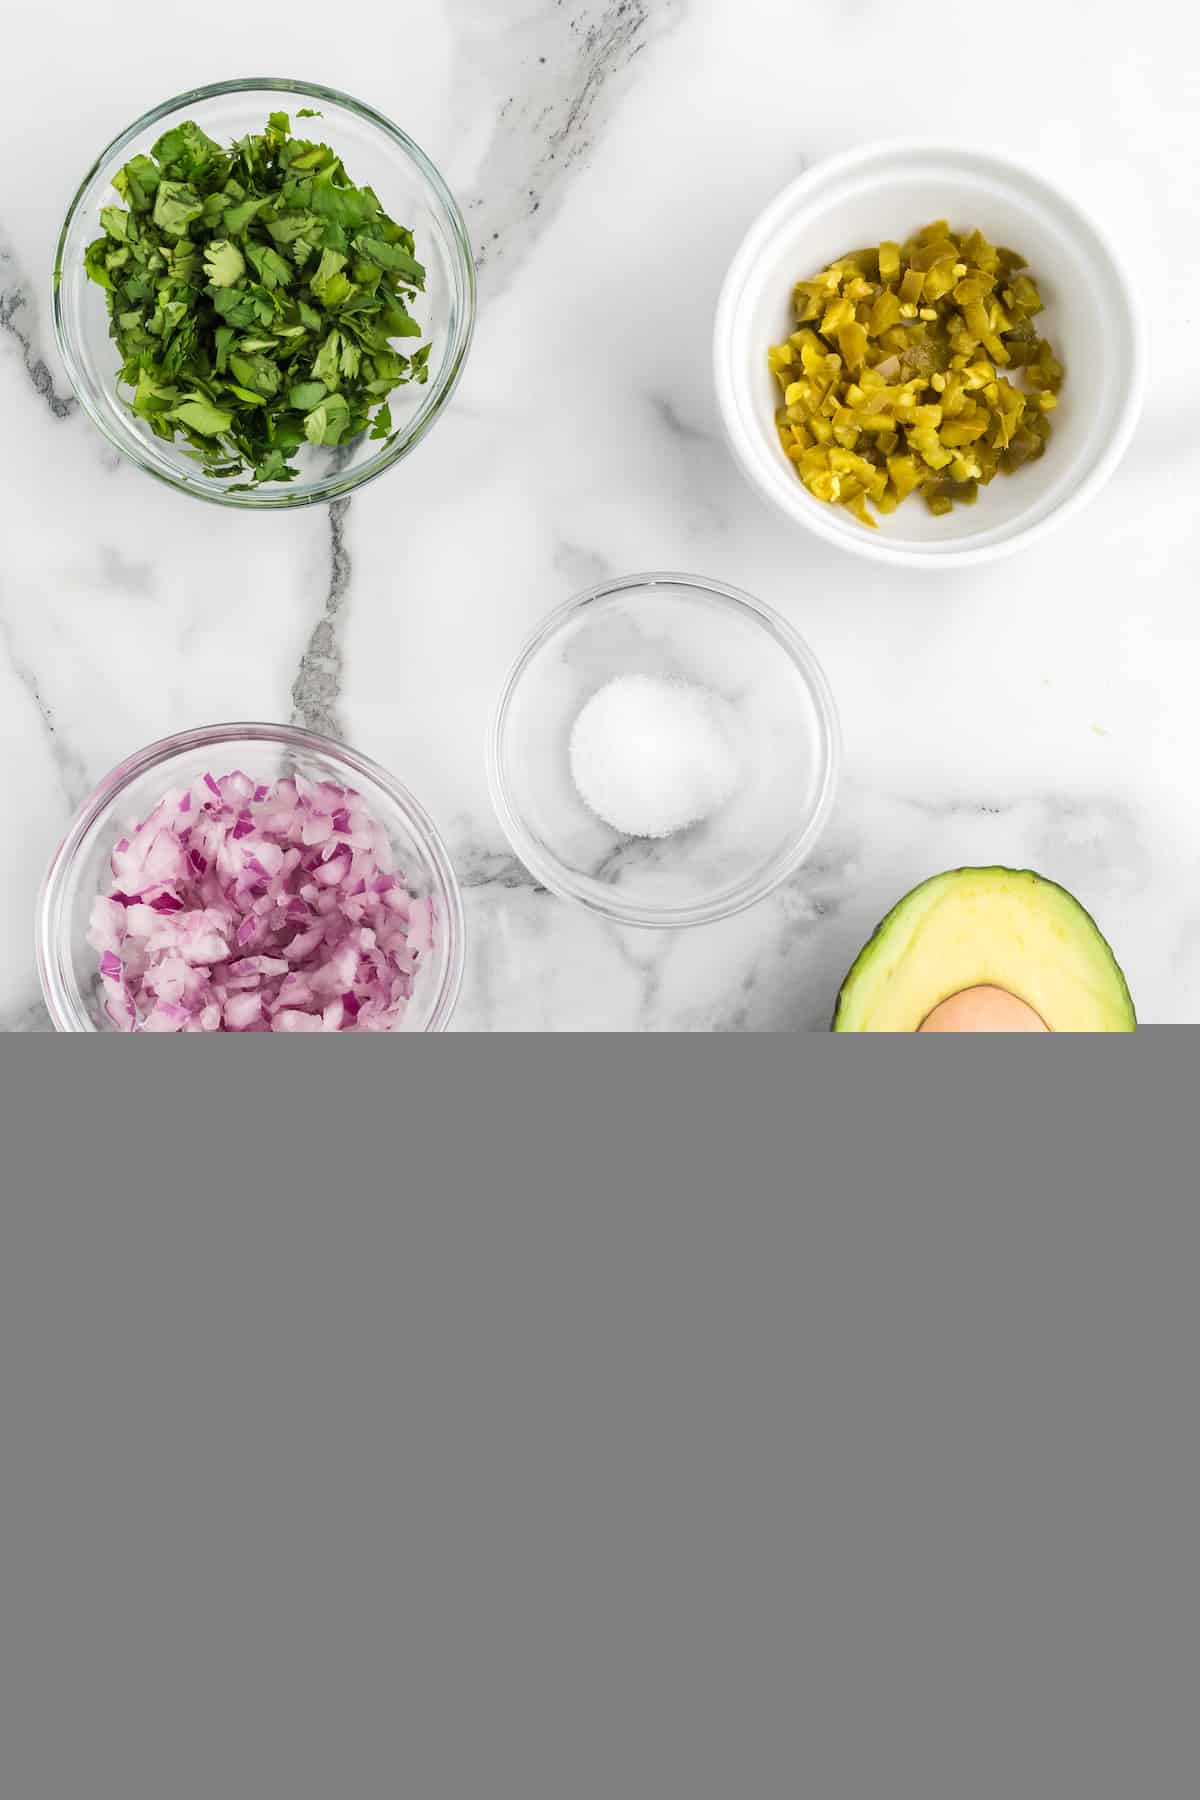 ingredients for the fresh guacamole chopped and in small glass bowls.